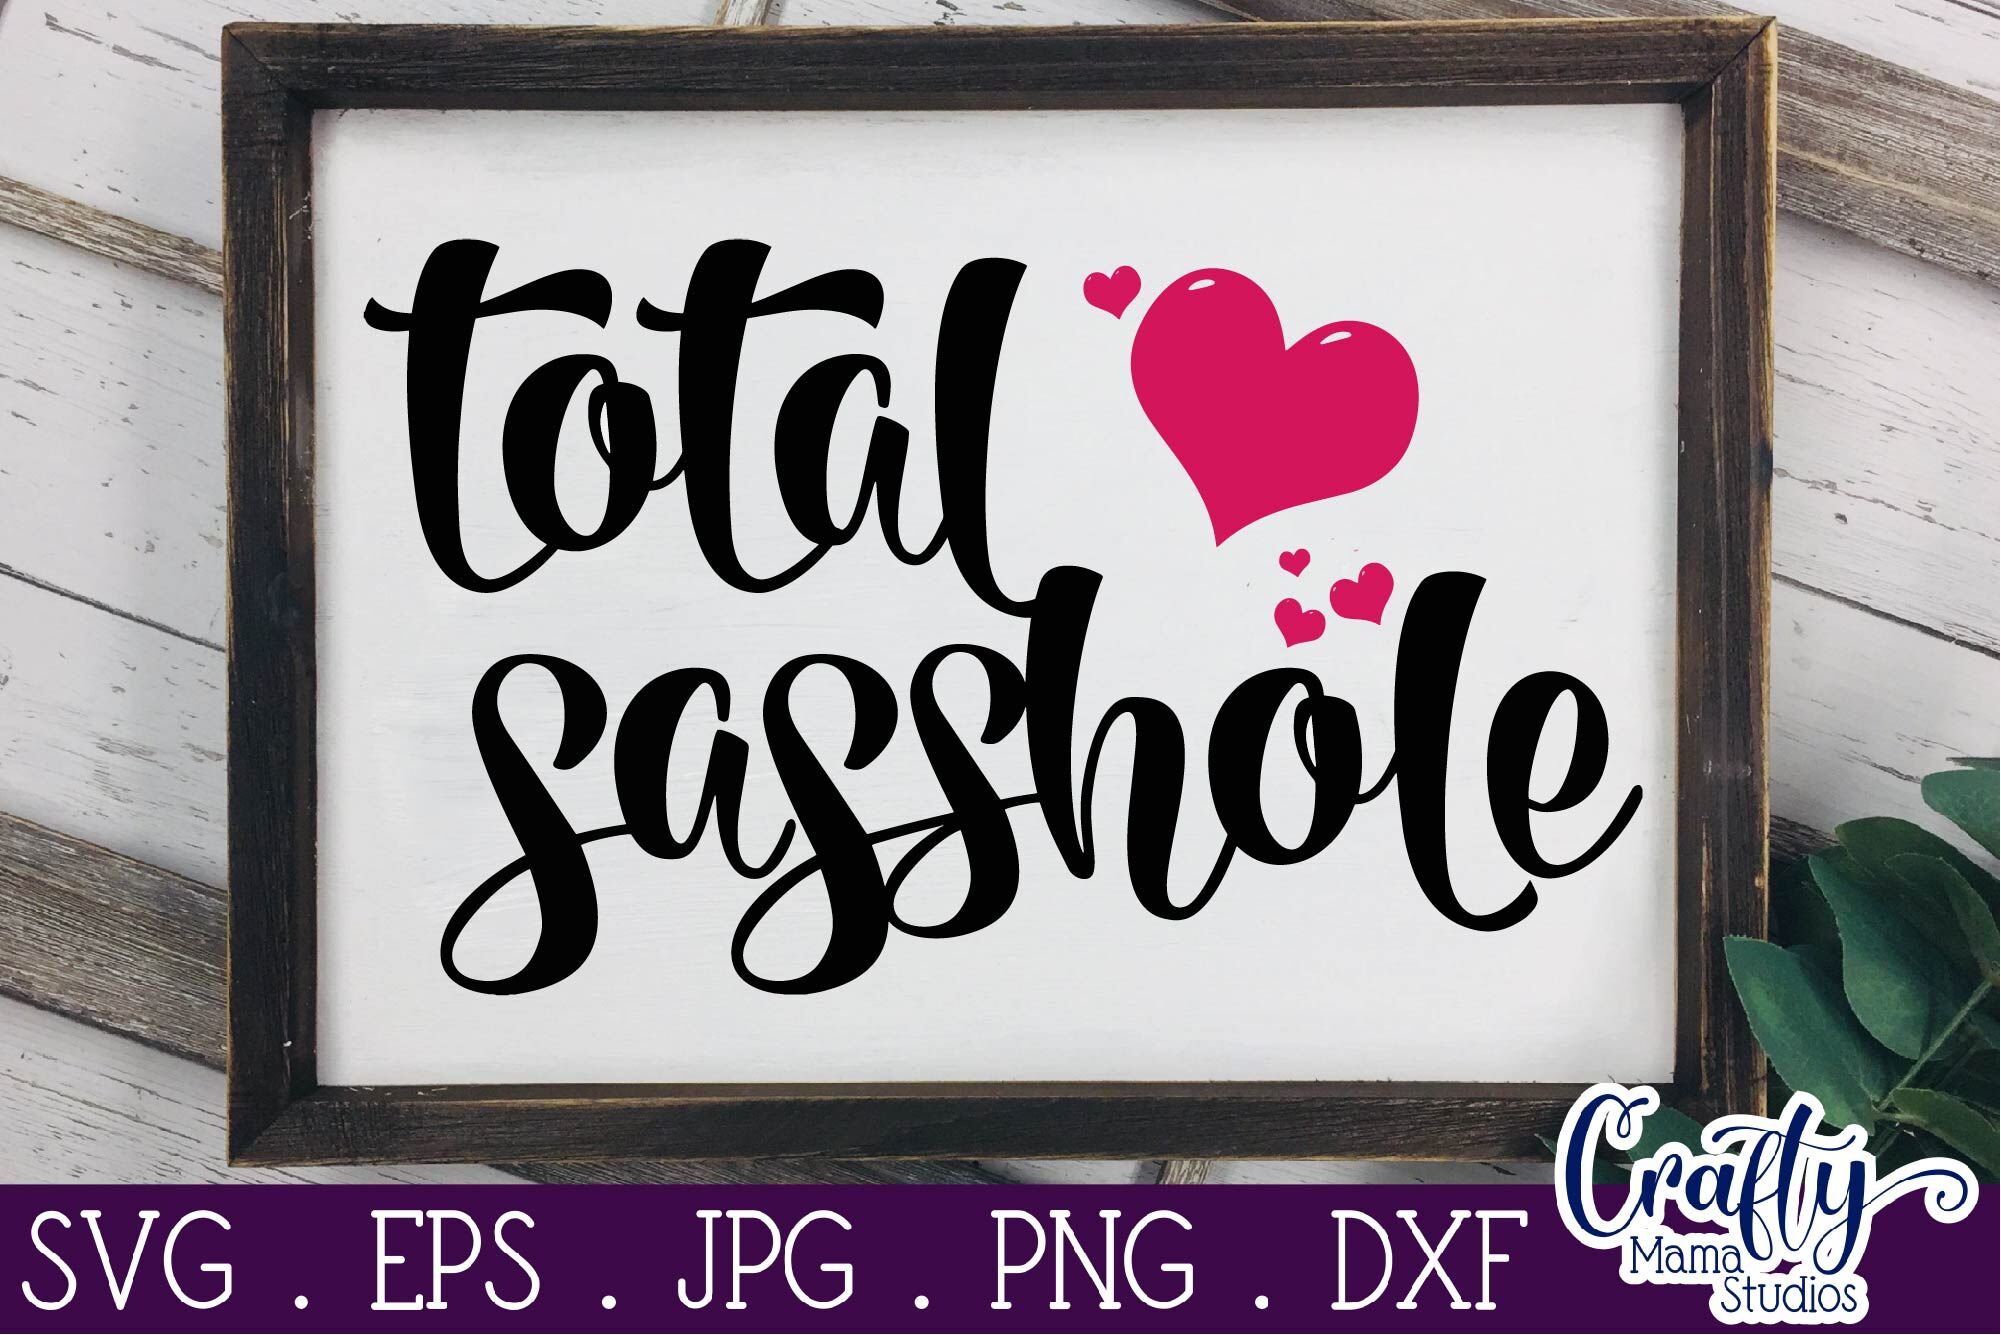 Download Sasshole Svg See More Ideas About Cricut Creations Silhouette Cameo Projects And Diy Leather Earrings Yellowimages Mockups